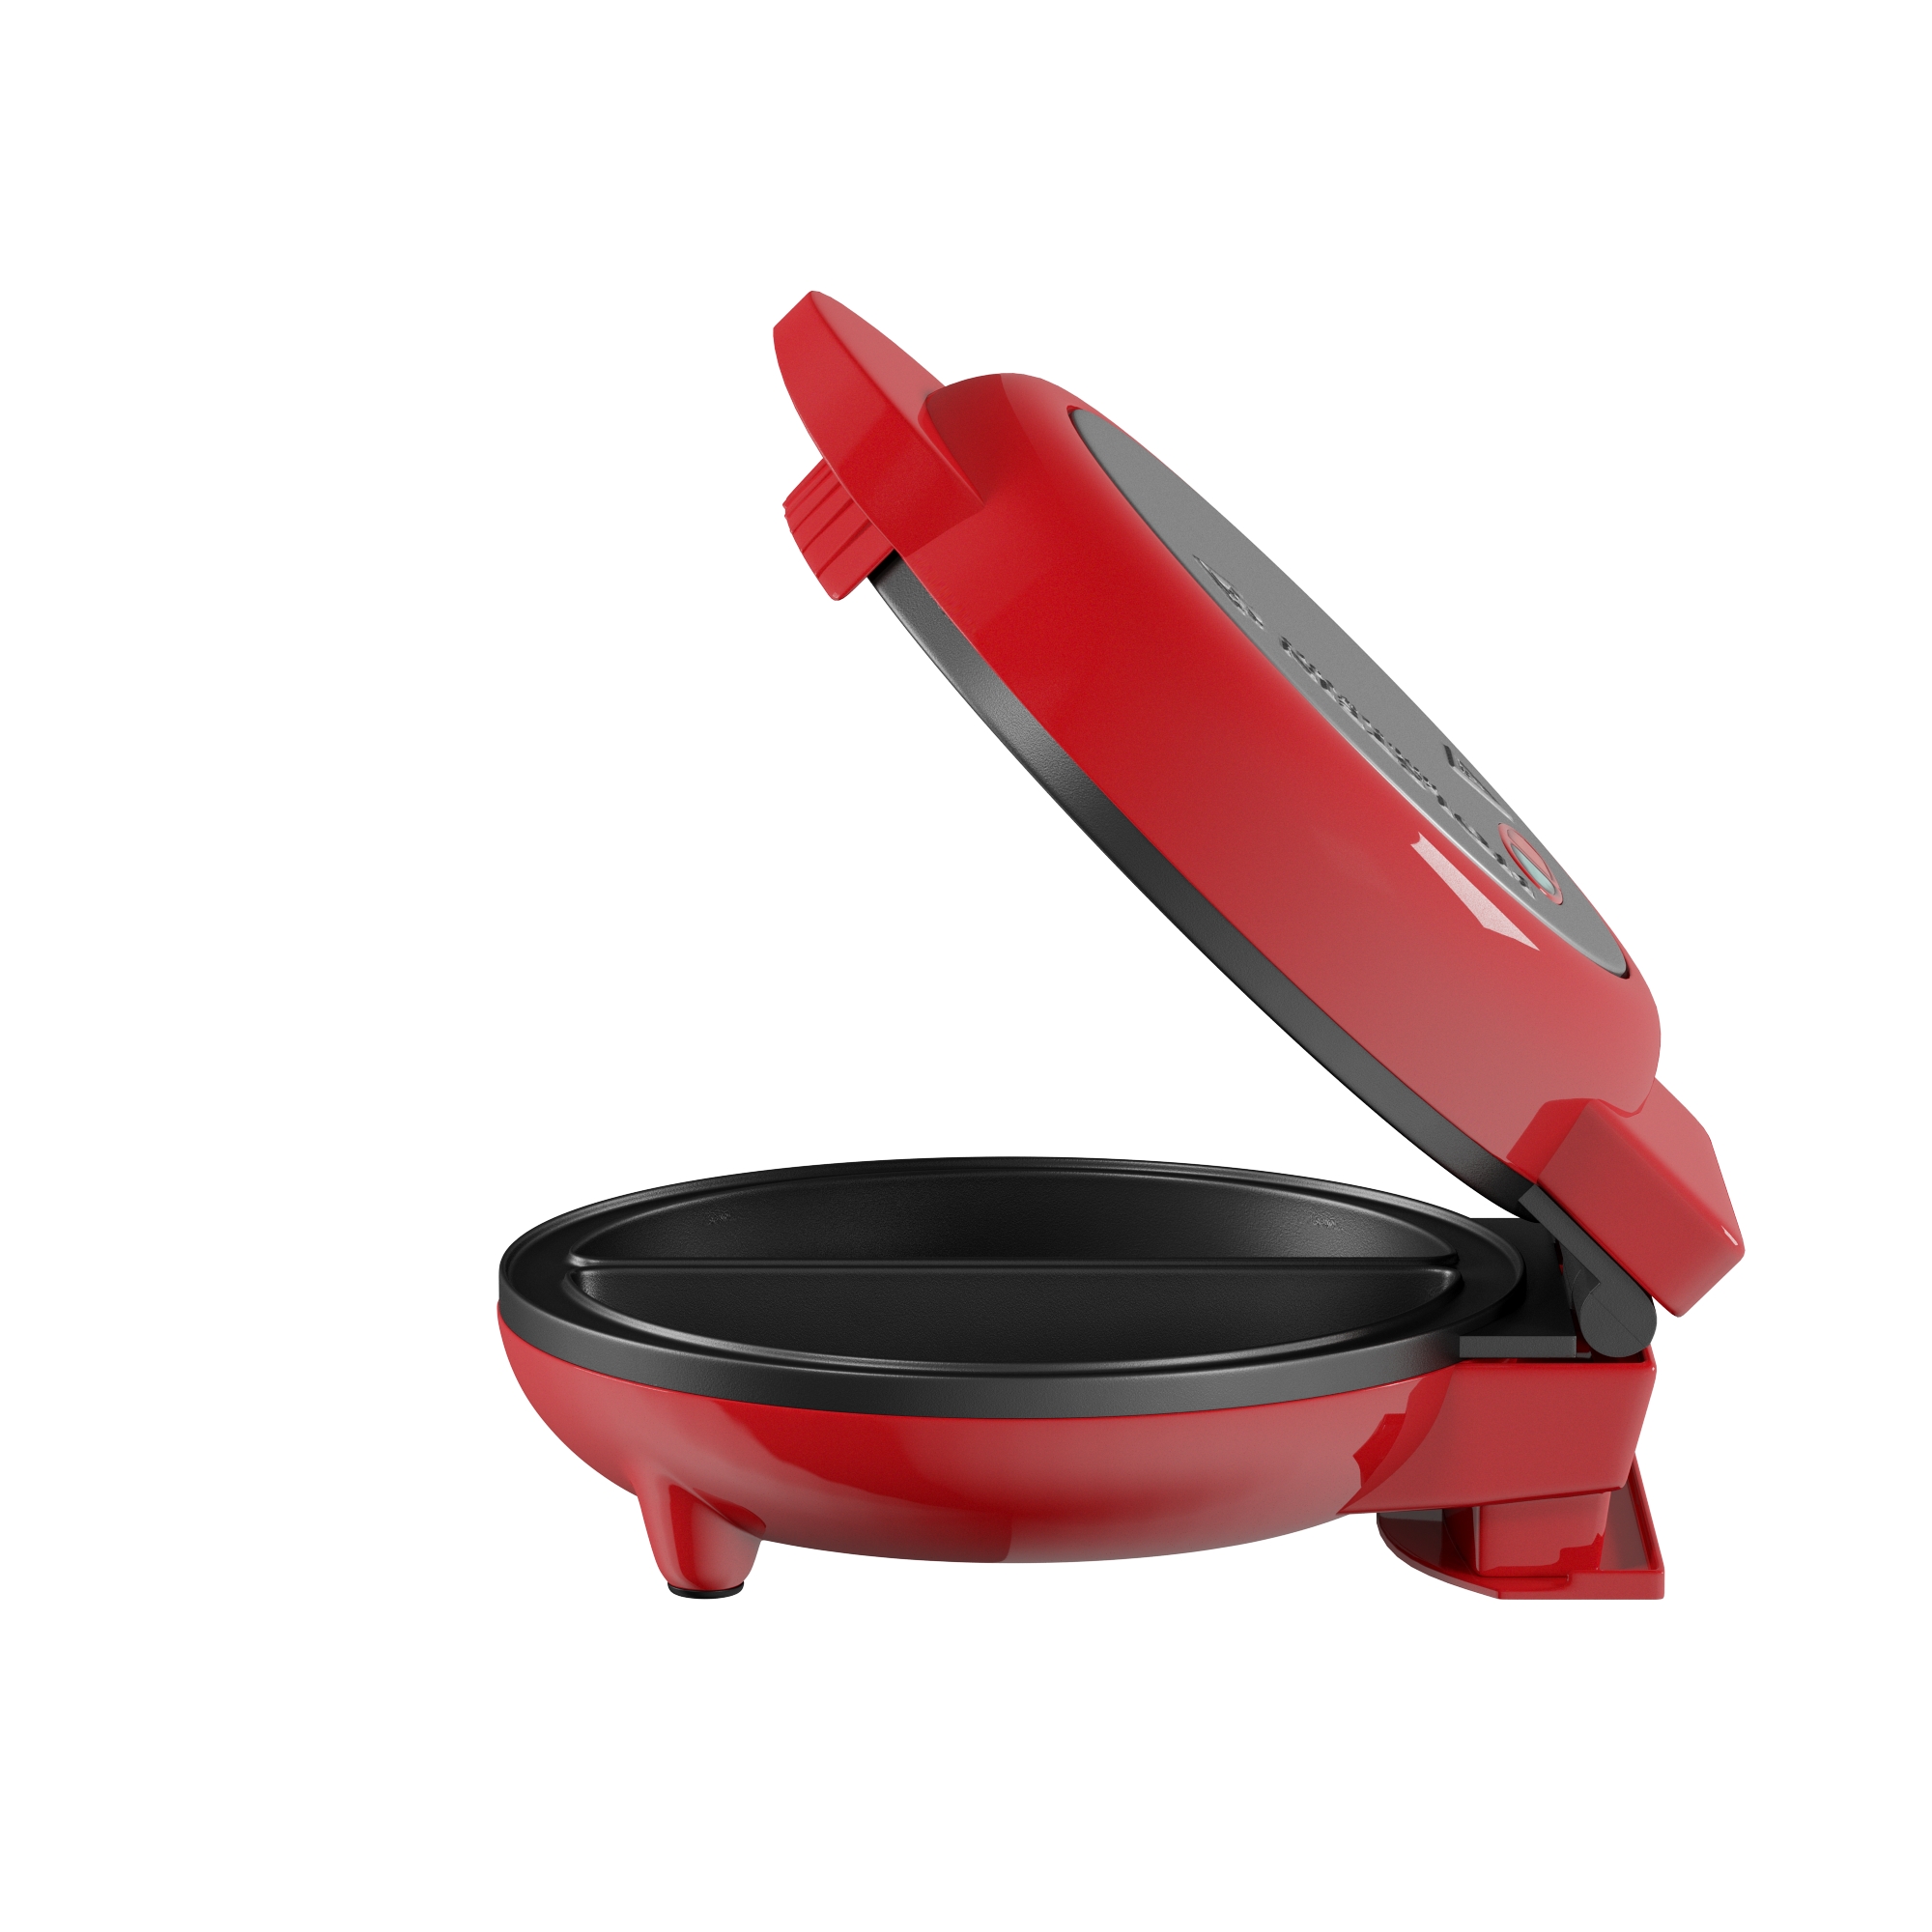 Holstein Housewares 2-Section Stainless Steel Omelet Maker, Red 760W